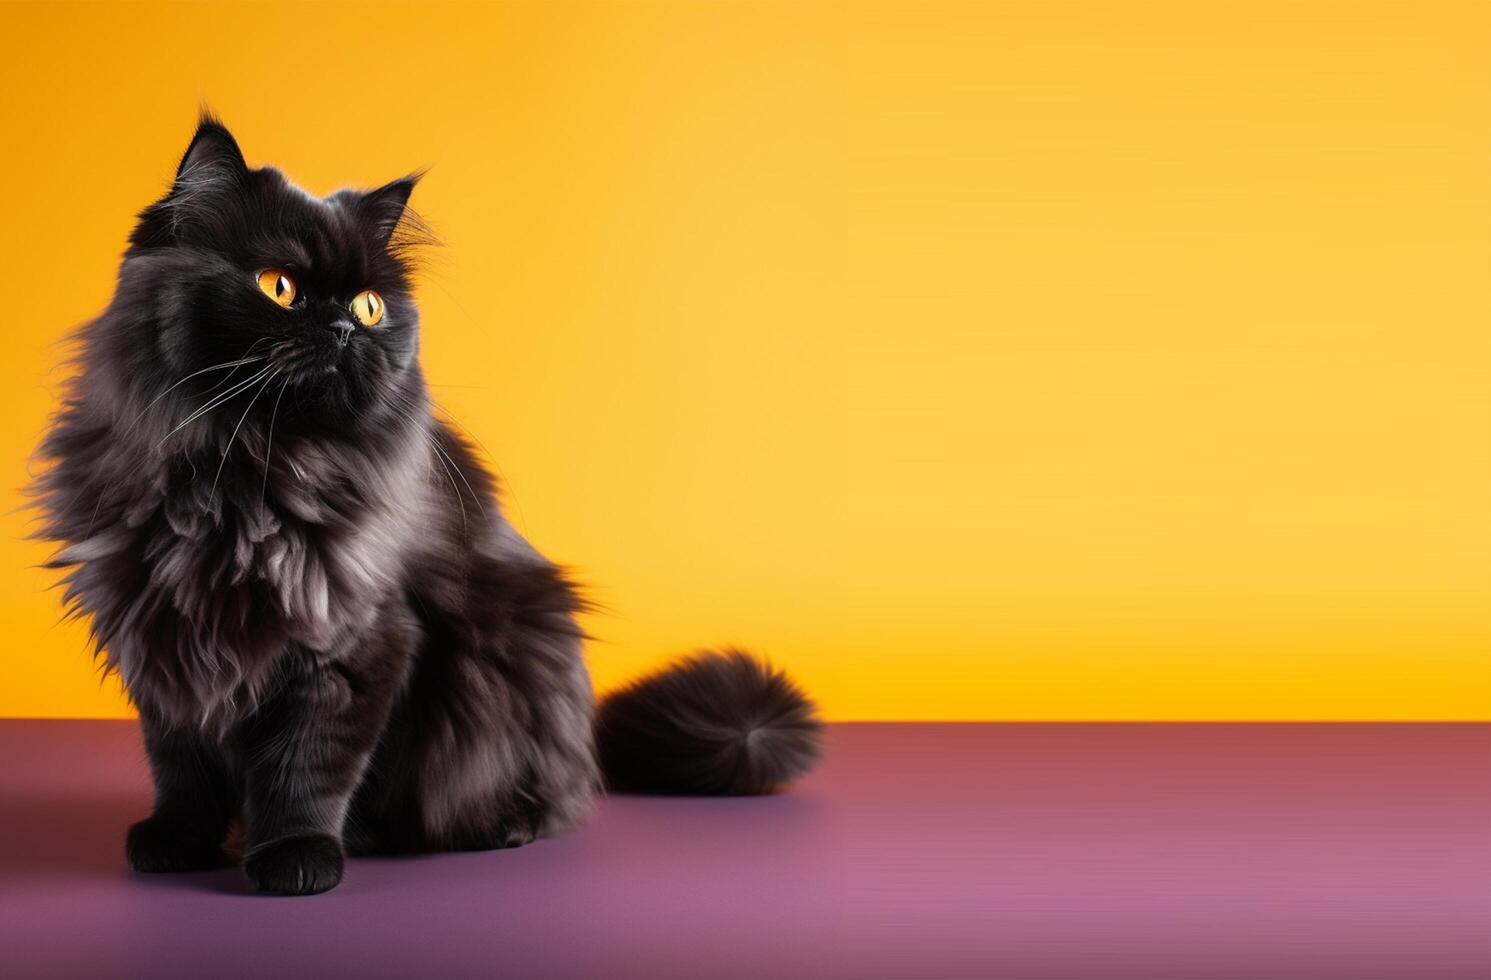 black persian cat portrait yellow and purple background. with copy space. photo